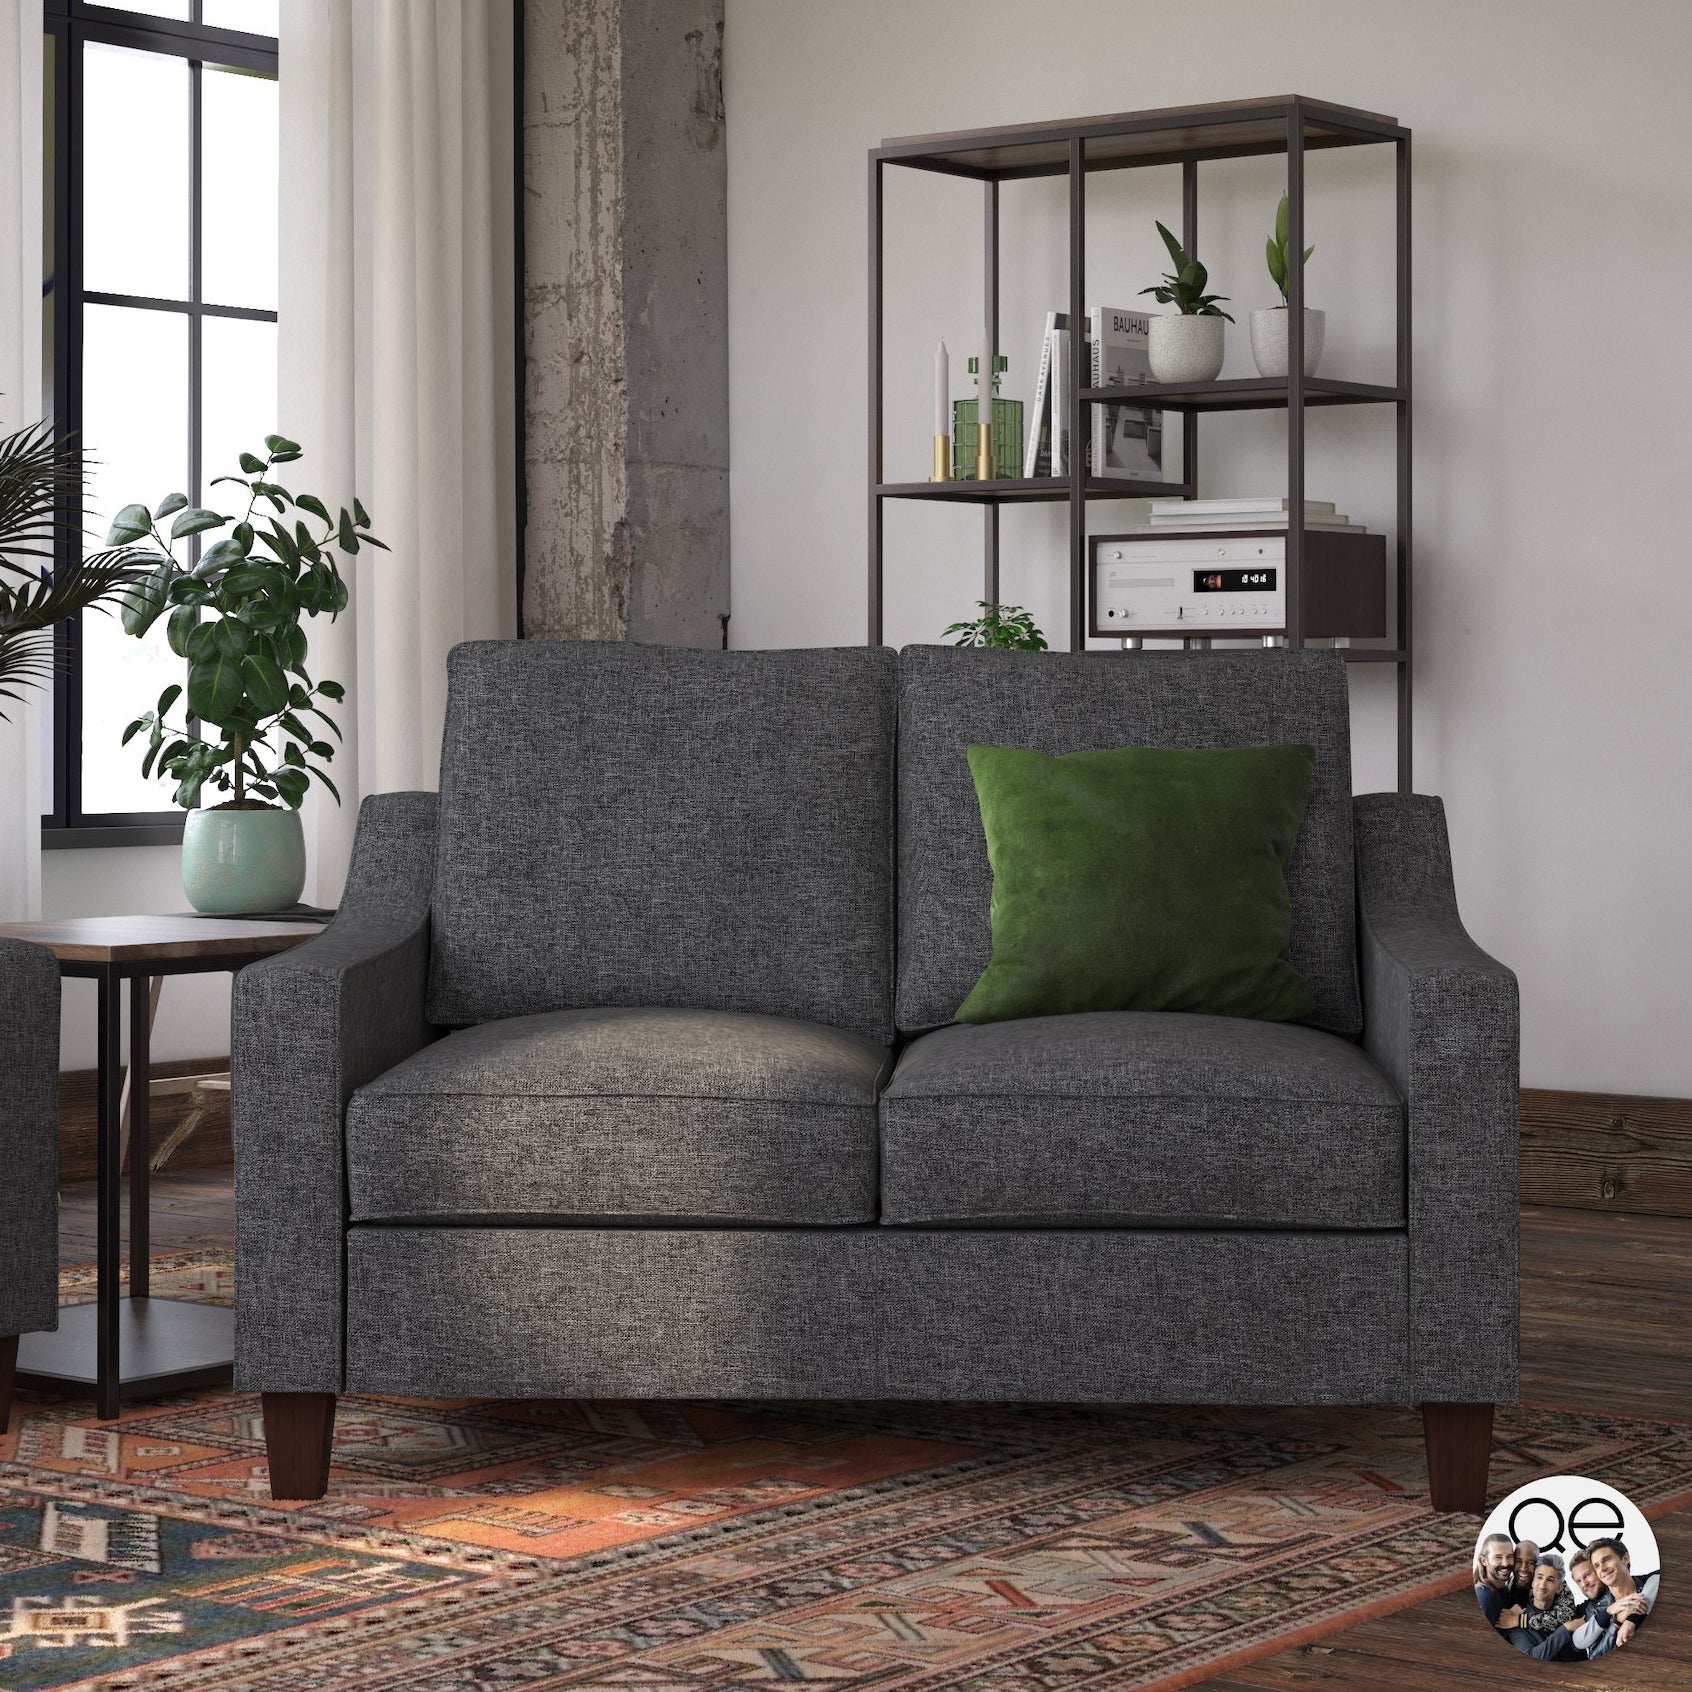 The gray two-seater couch with sleigh arms and wooden legs